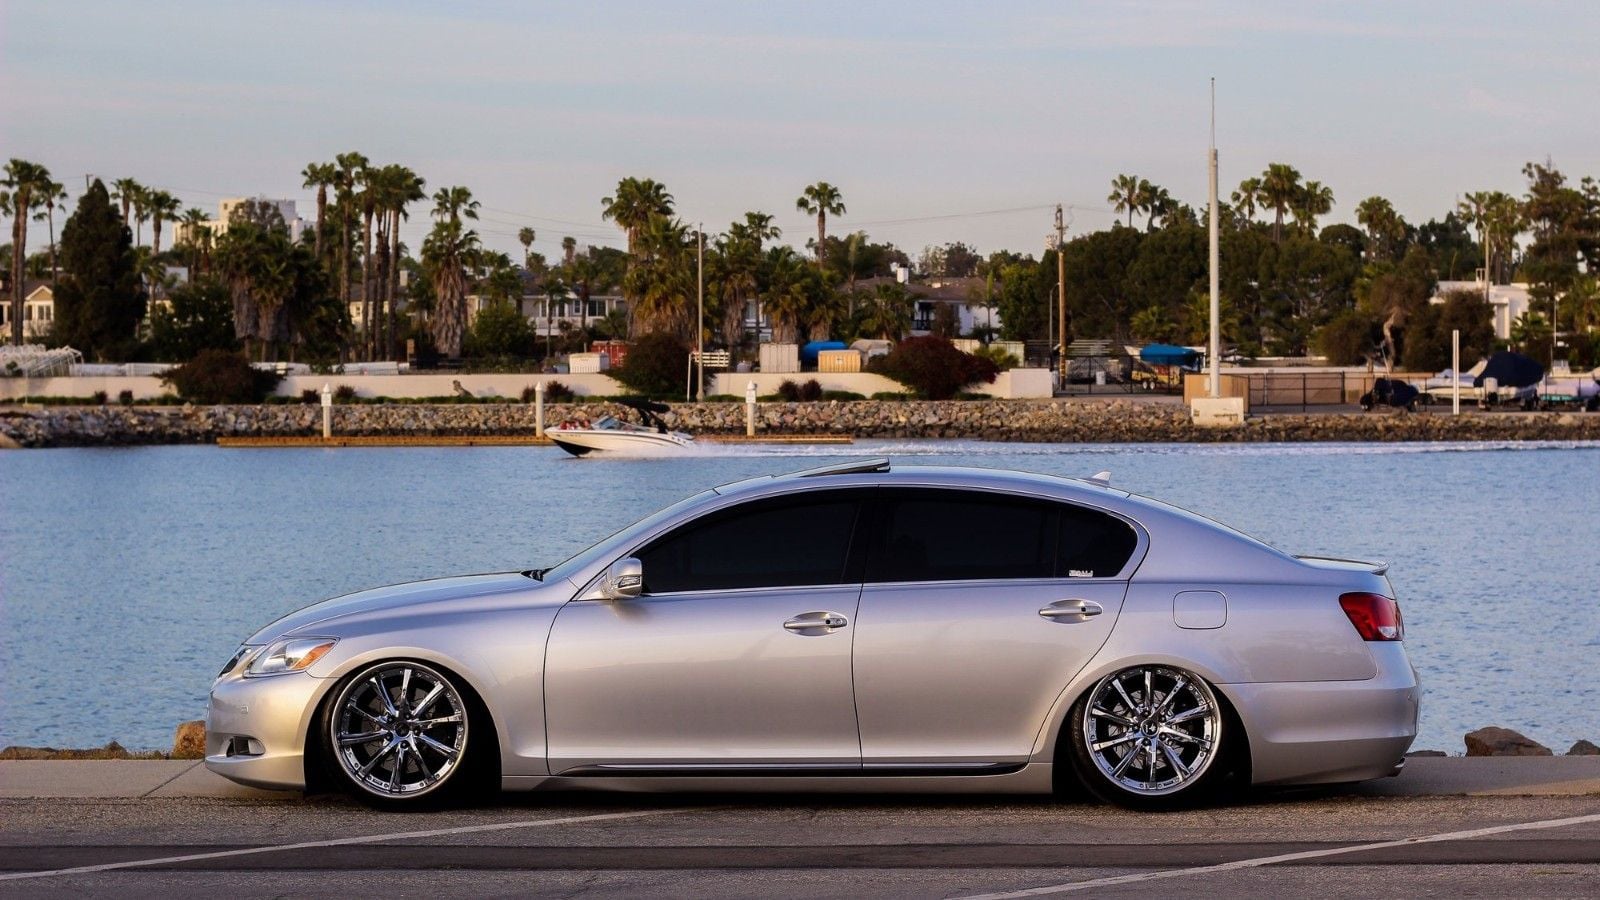 08 Gs 350 Is One Bad Bagged Build Clublexus